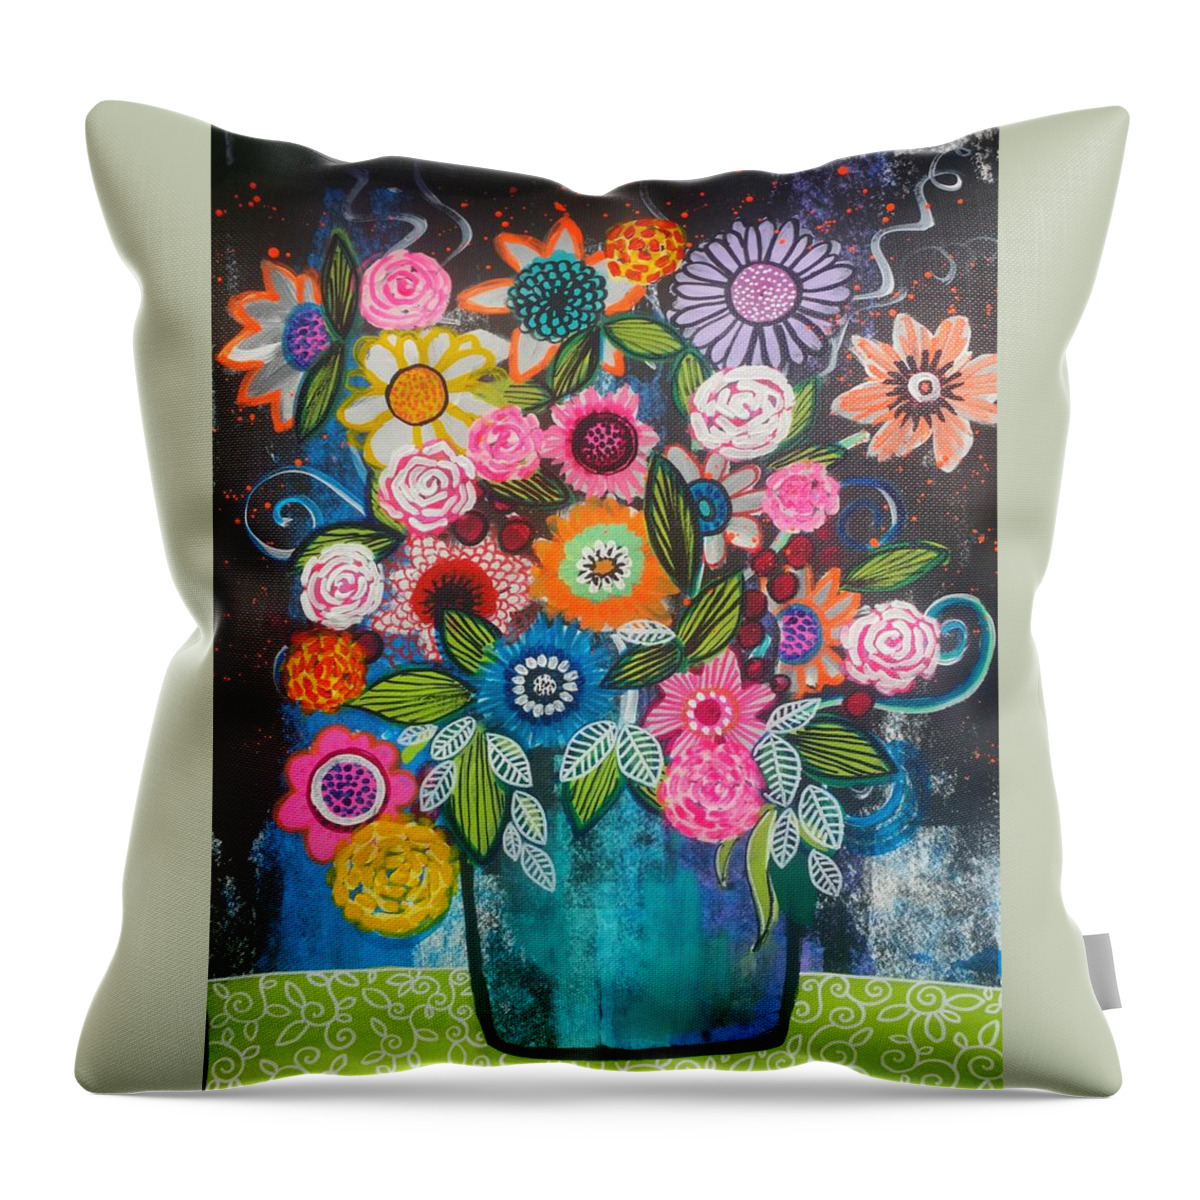 Still Life Throw Pillow featuring the painting Mardi Gra by Robin Mead